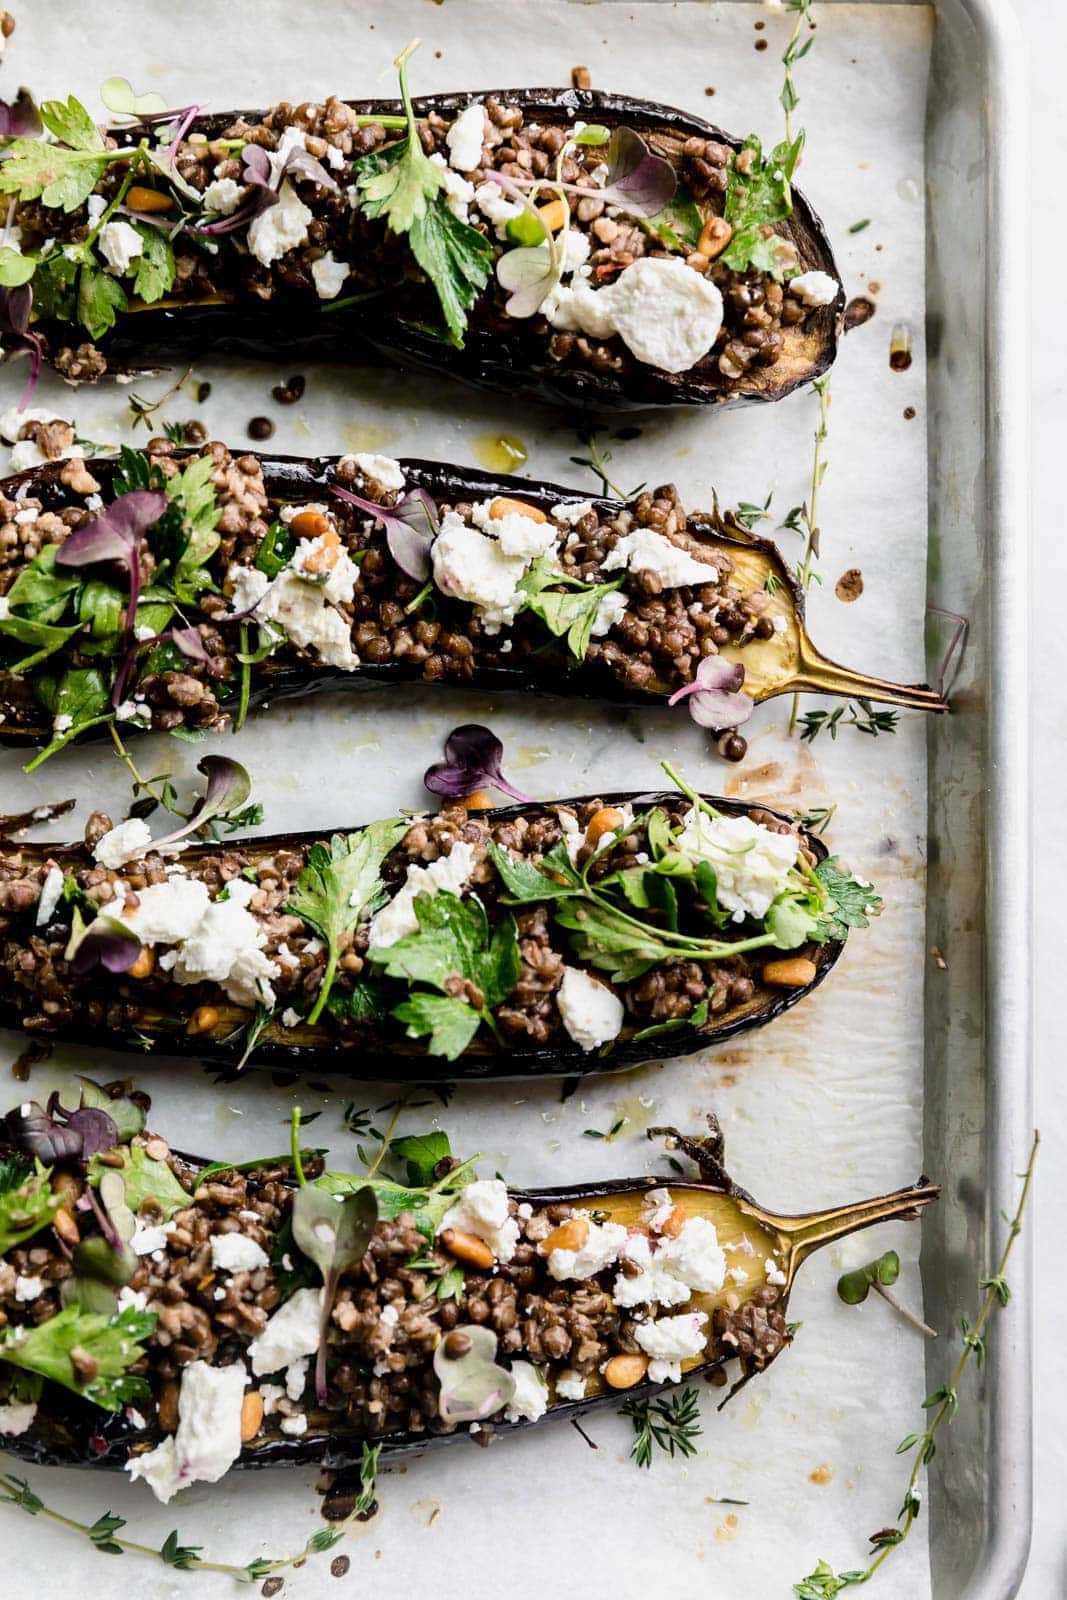 Lentil Recipe With Roasted Eggplant